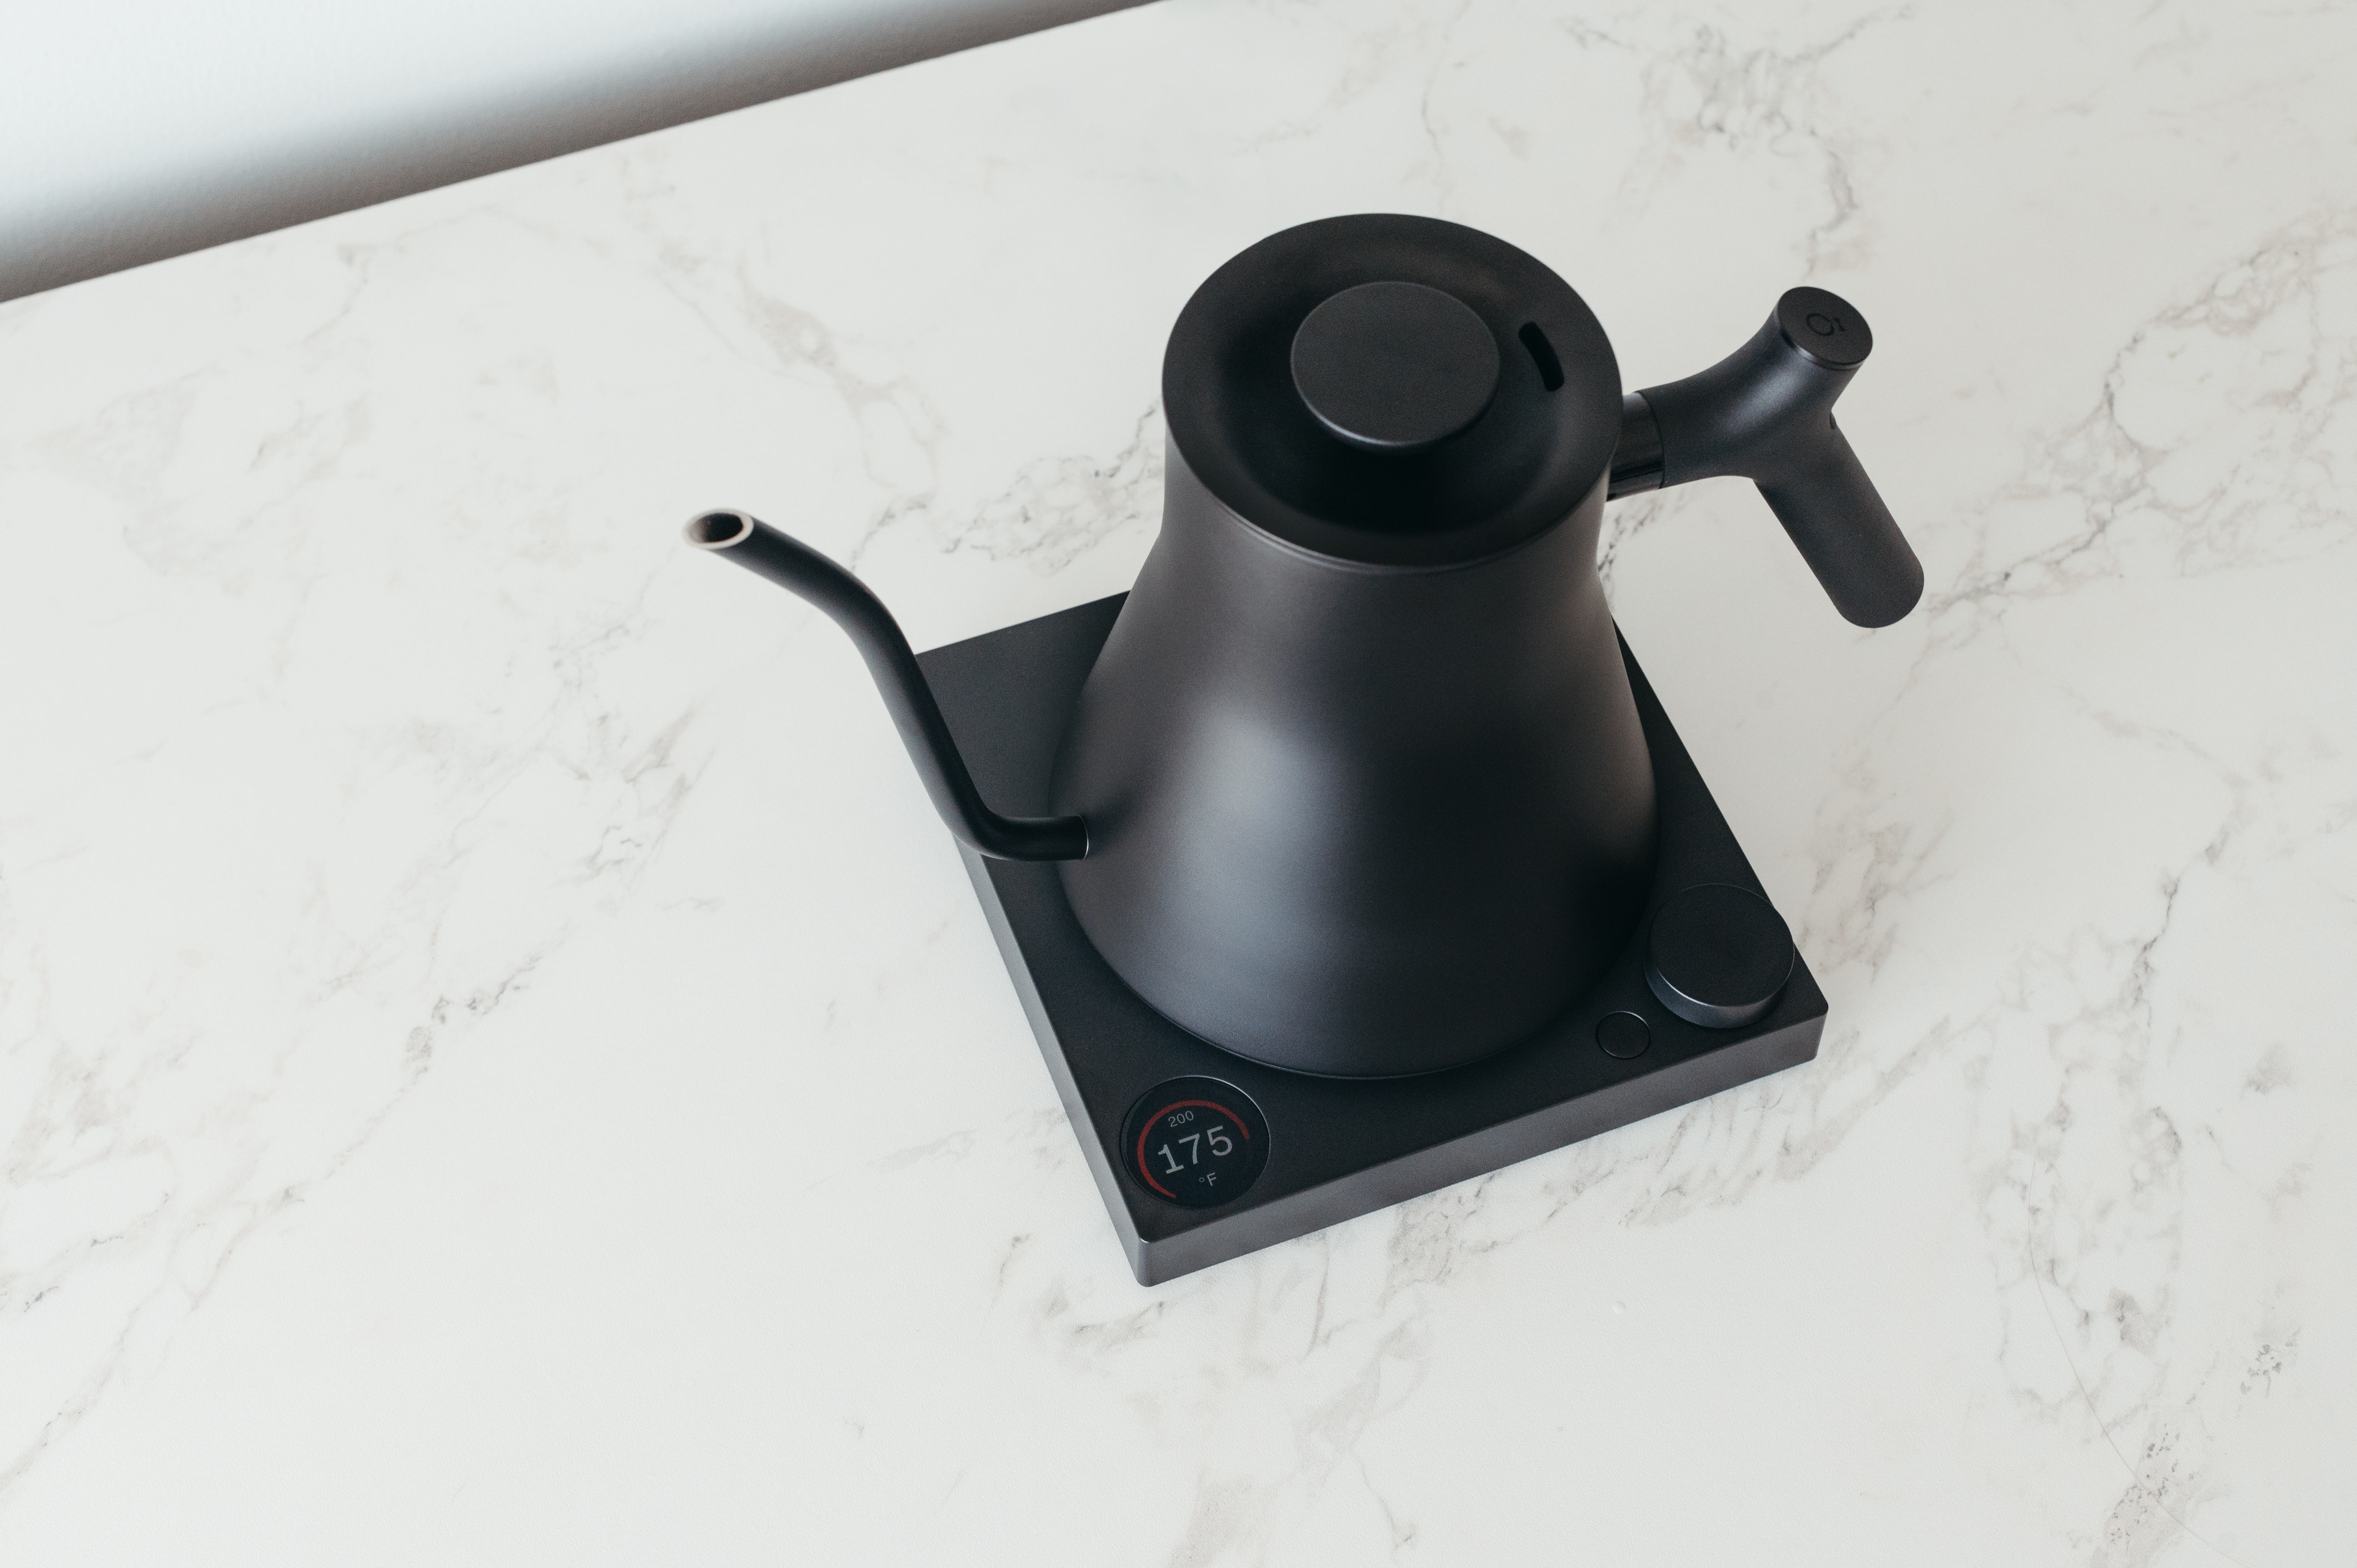 Stagg's EKG Pro Sets the Standard for the Electric Pour-over Kettle